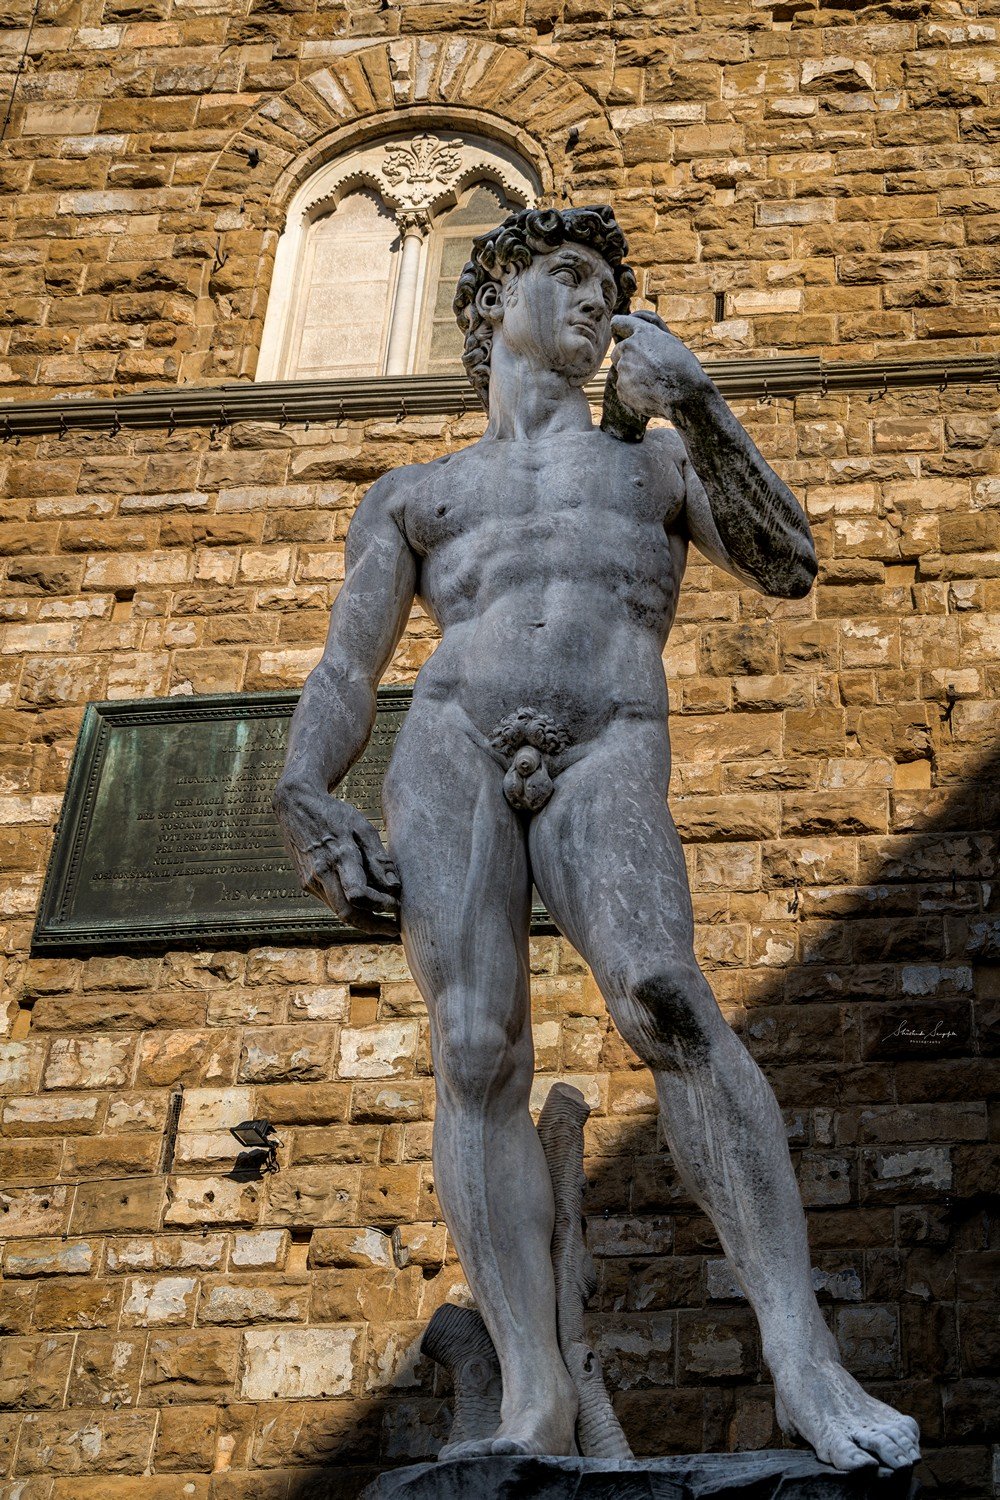 Michelangelo's David replica in front of palazzo vecchio town hall situated on piazza del signoria in florence tuscany italy shot during summer